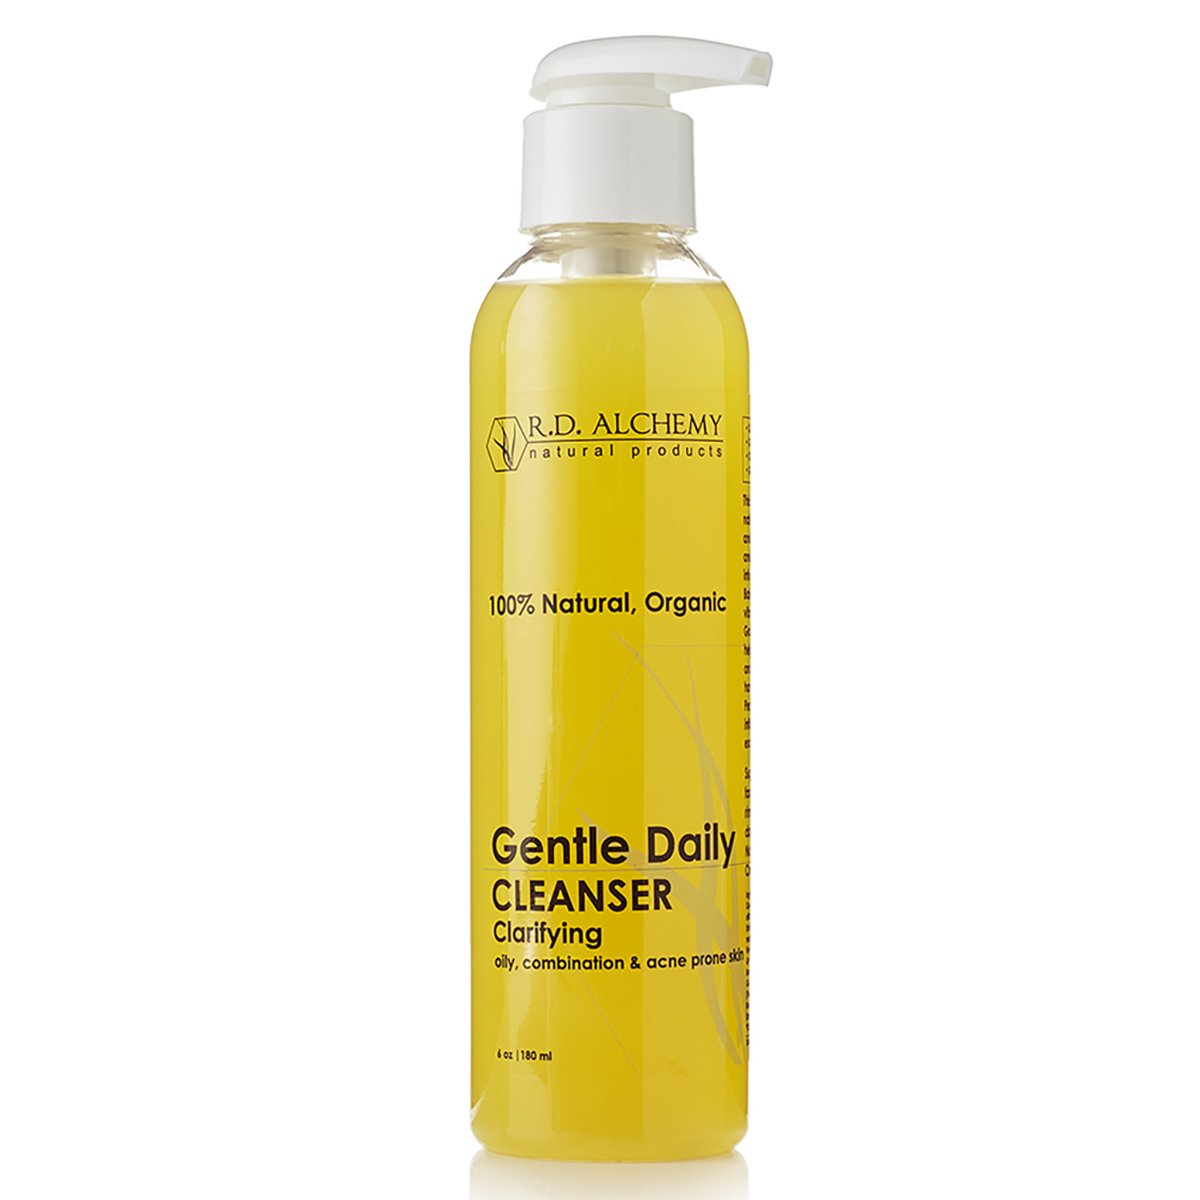 Gentle Daily Cleaner - Face Wash